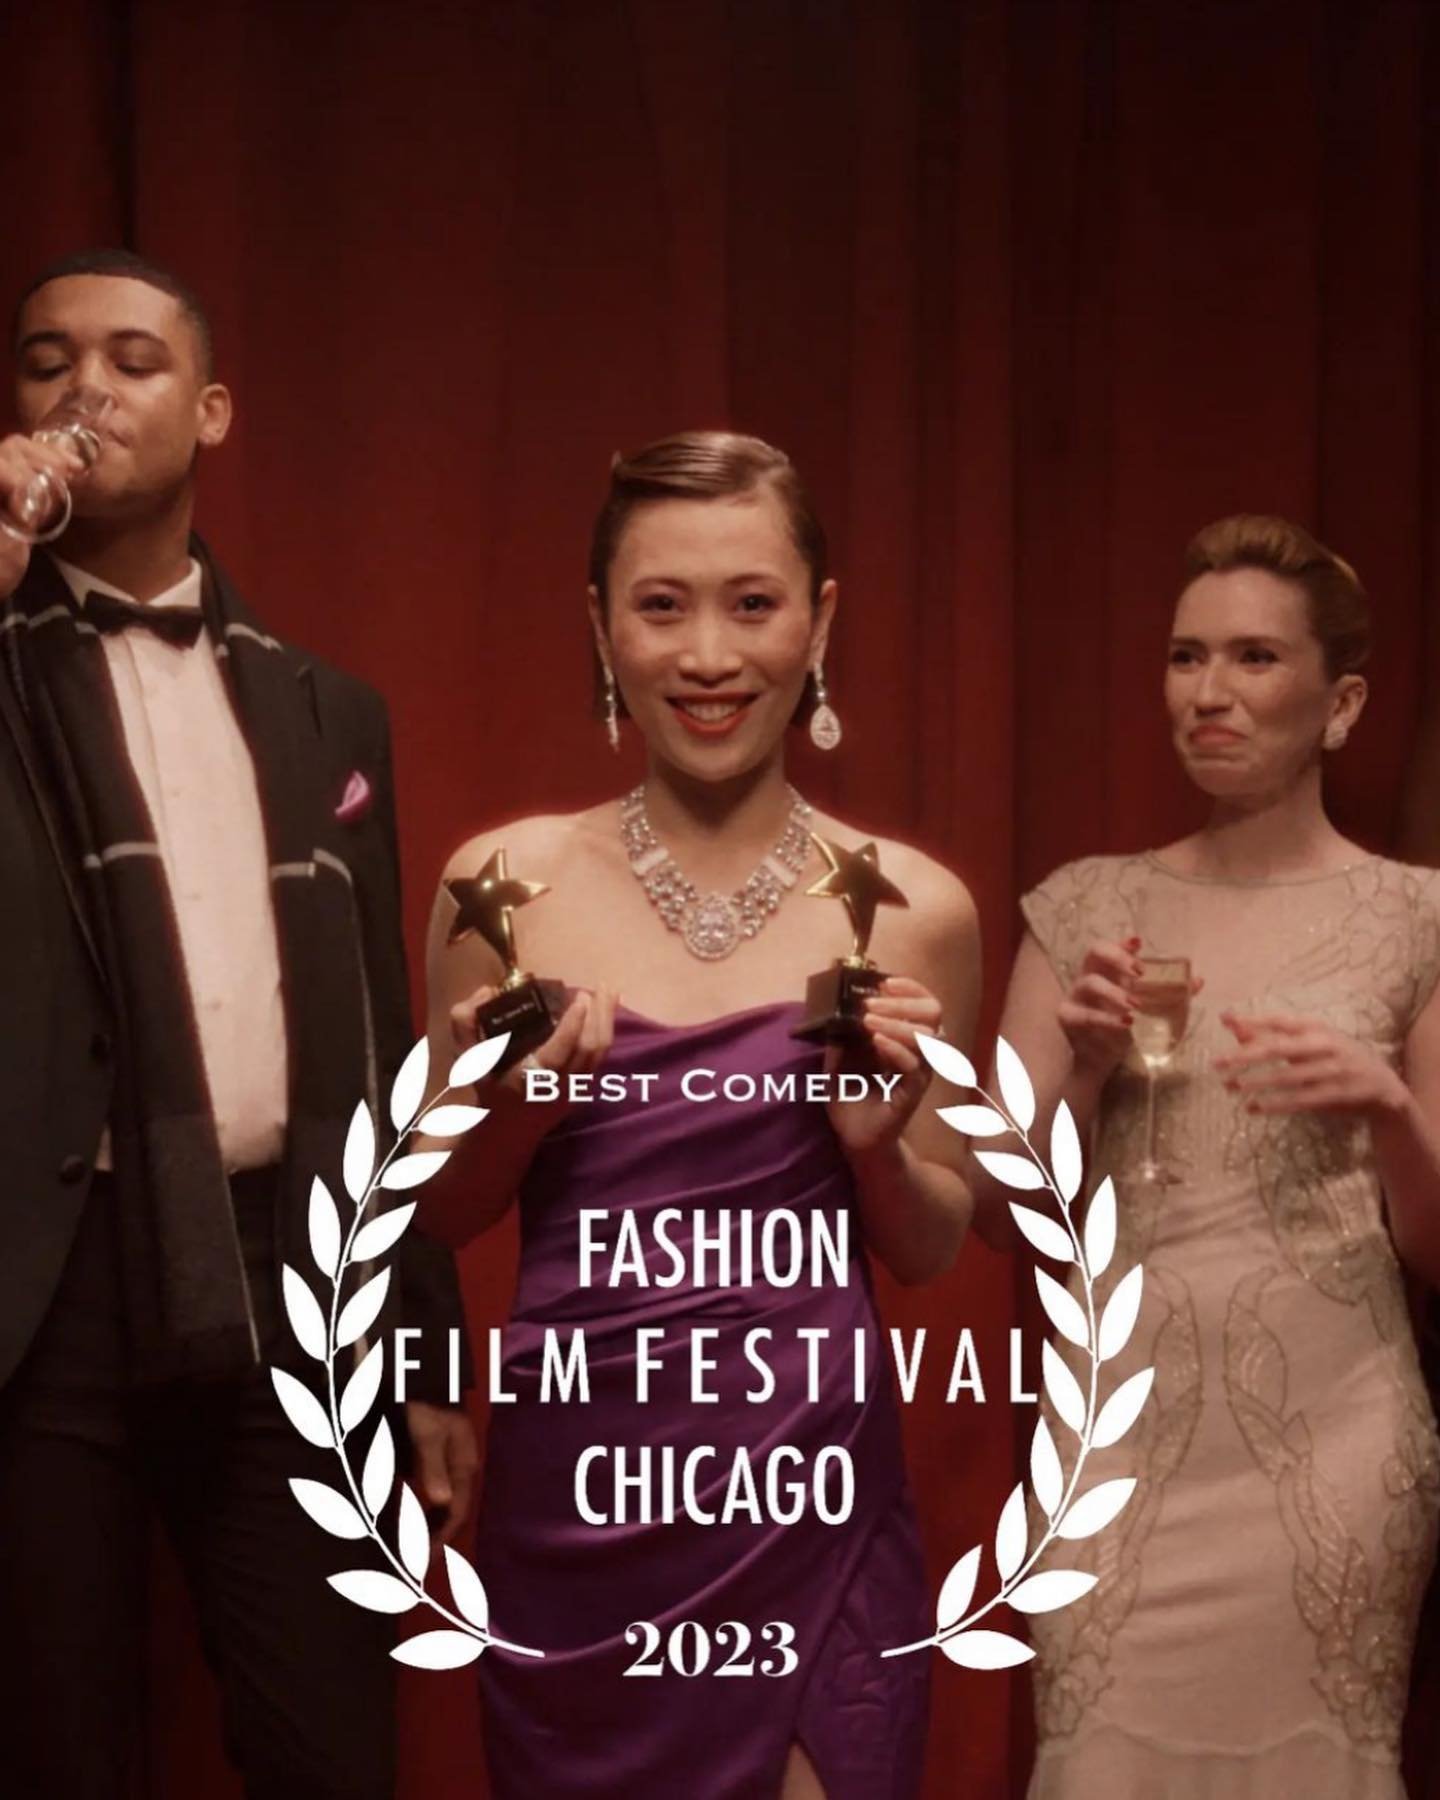 @odetoprocrastination written and directed by Wonder Woman @aleksandrakingo has absolutely cleaned up this festival season! Feeling super grateful to have seen her work her magic first hand✨ winner @fashionfilmfestivalchicago @berlincommercial @barce